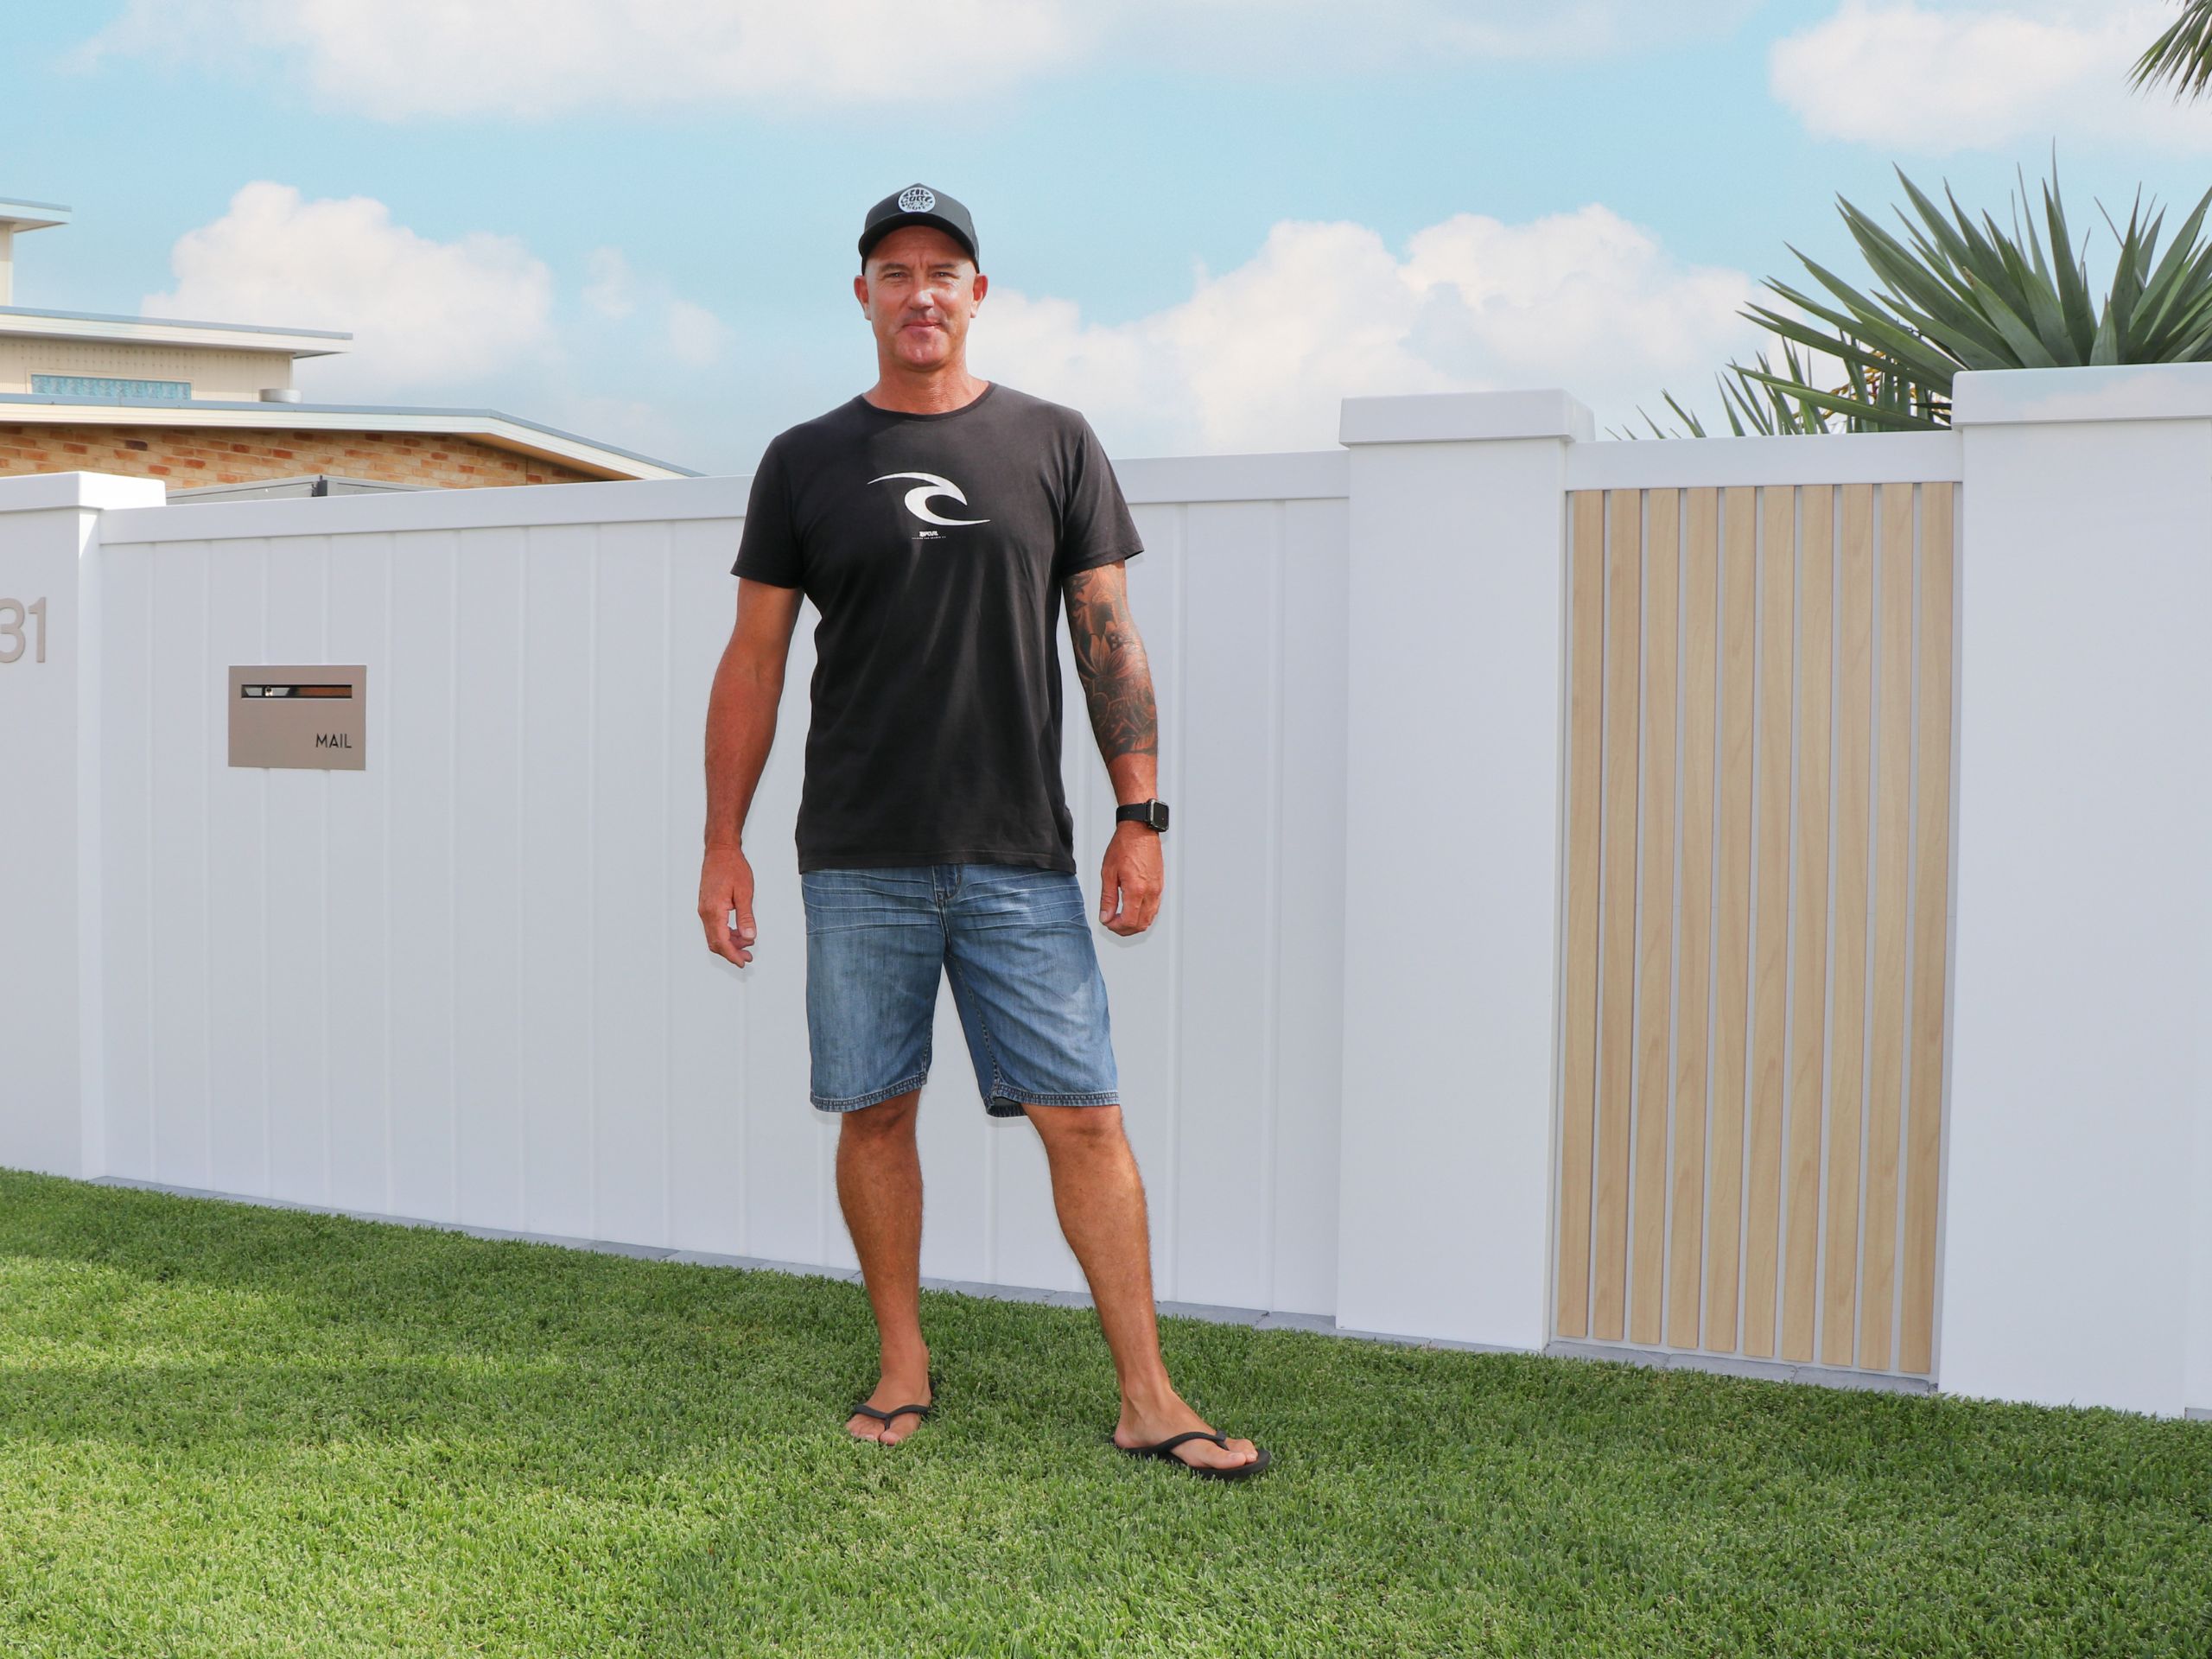 The customised EstateWall front wall provides the beachy landscaping aesthetic homeowner Blake wanted